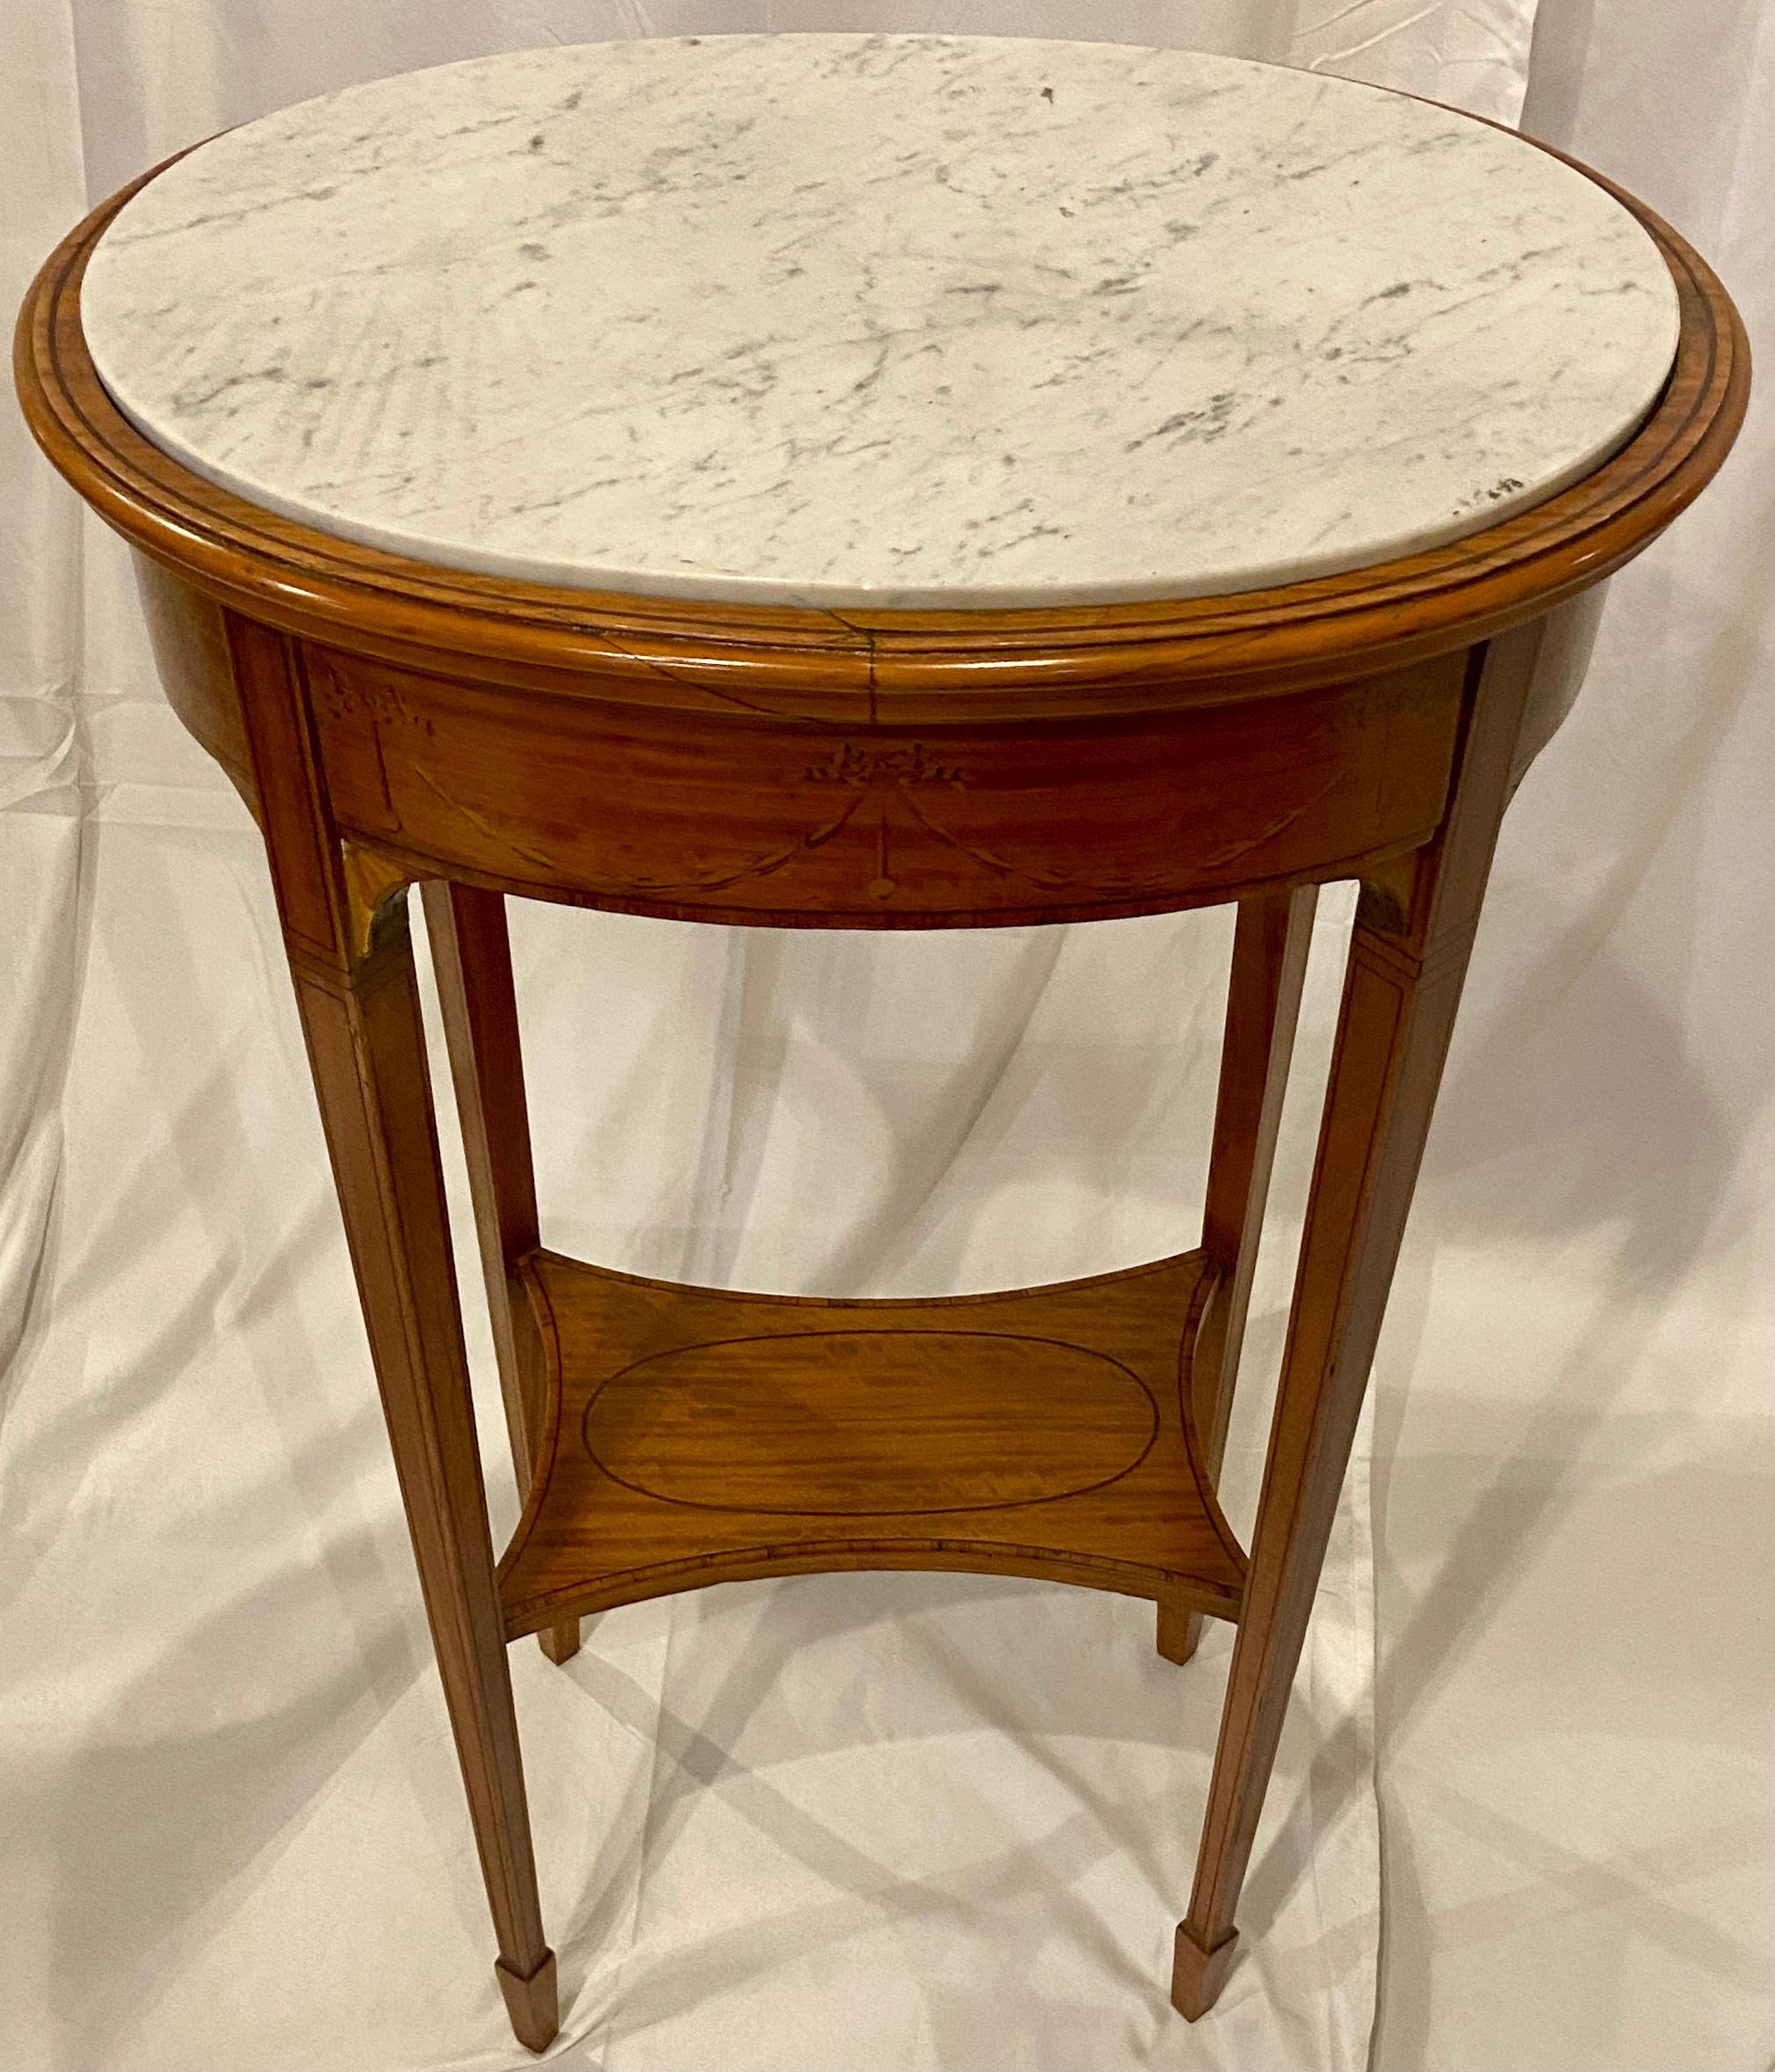 Pair Antique French grey and white marble-top satinwood side tables with inlay.